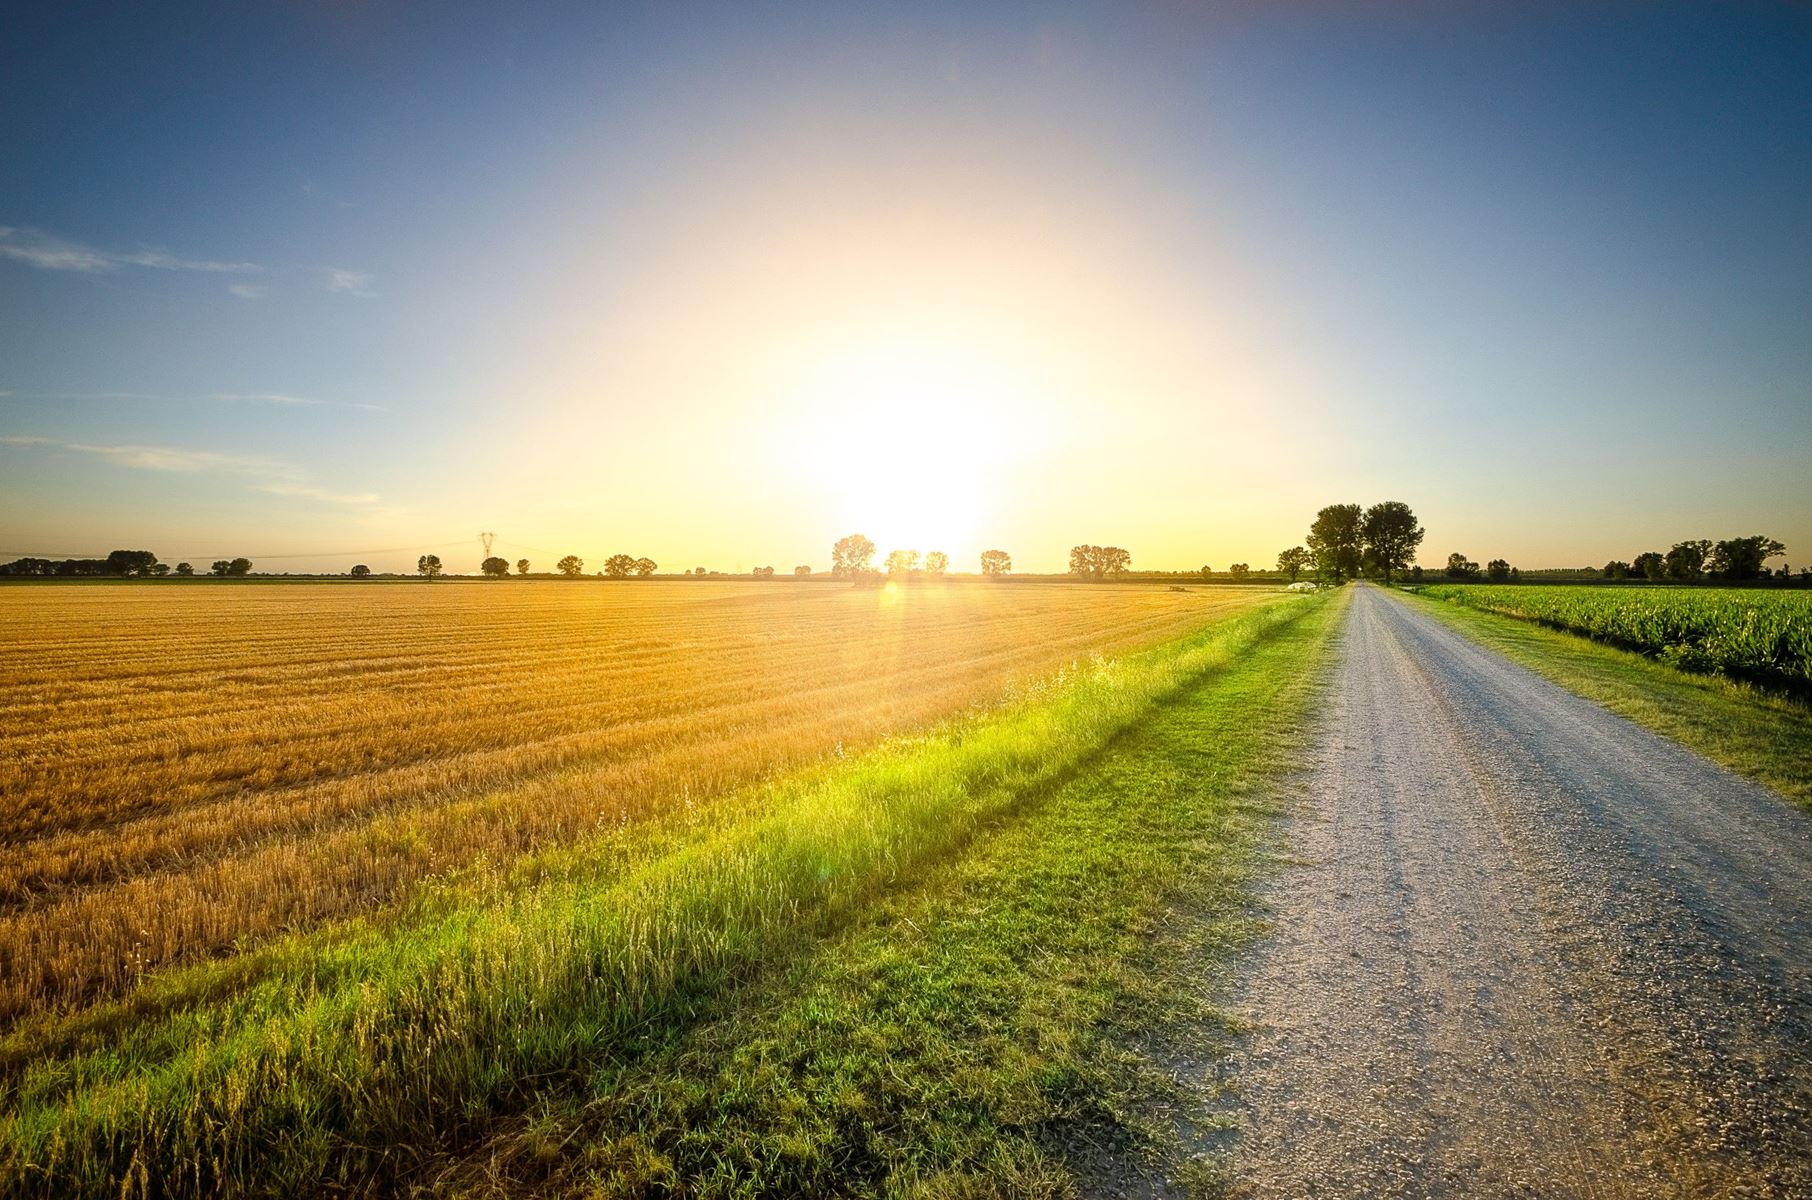 Looking down a dirt road with a wheat field on the left side, the sun is beginning to set